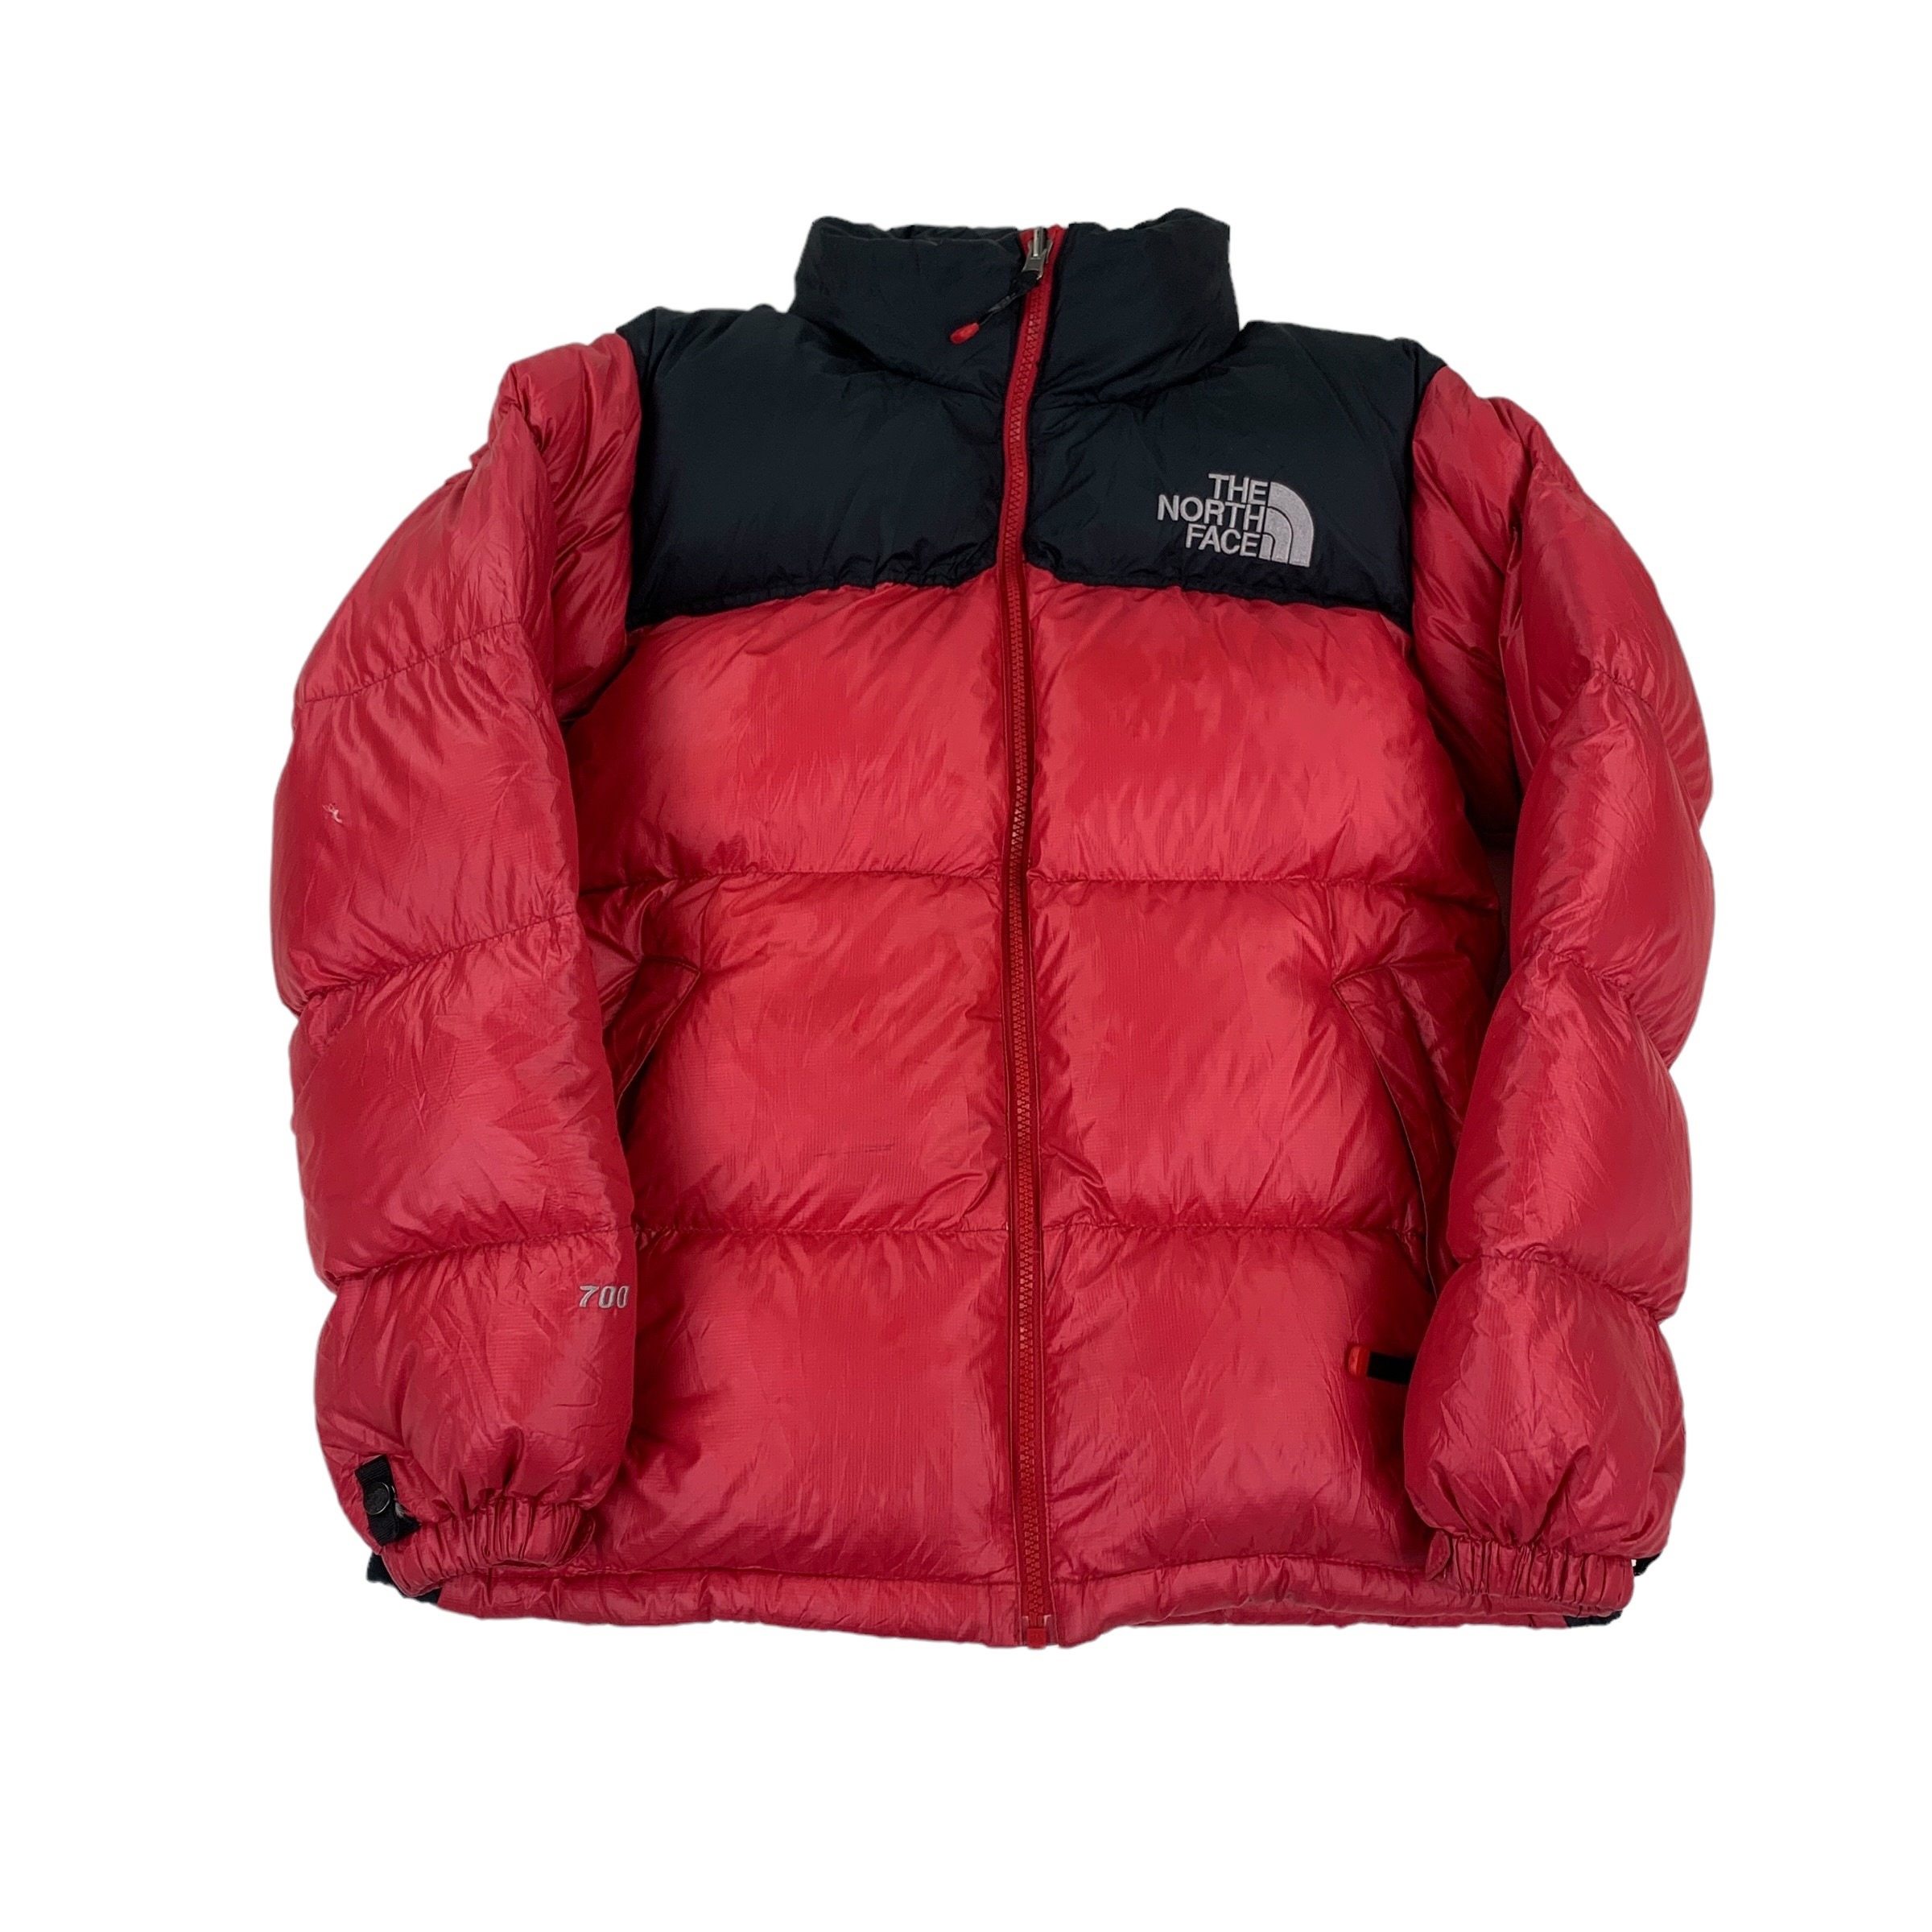 The Best Of North Face Shiny Bubble Jacket